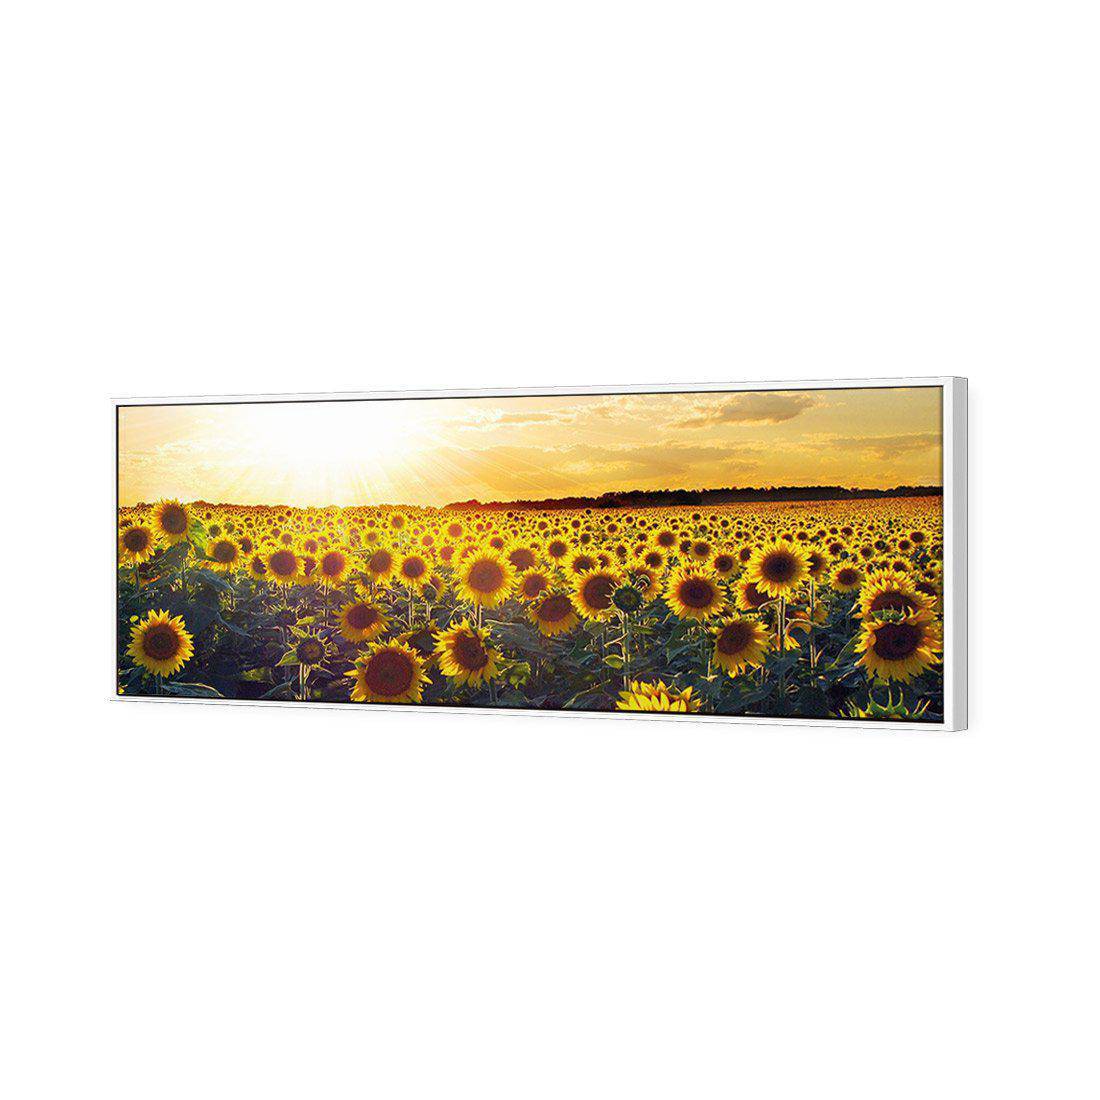 Sunflowers At Sunset Canvas Art-Canvas-Wall Art Designs-60x20cm-Canvas - White Frame-Wall Art Designs